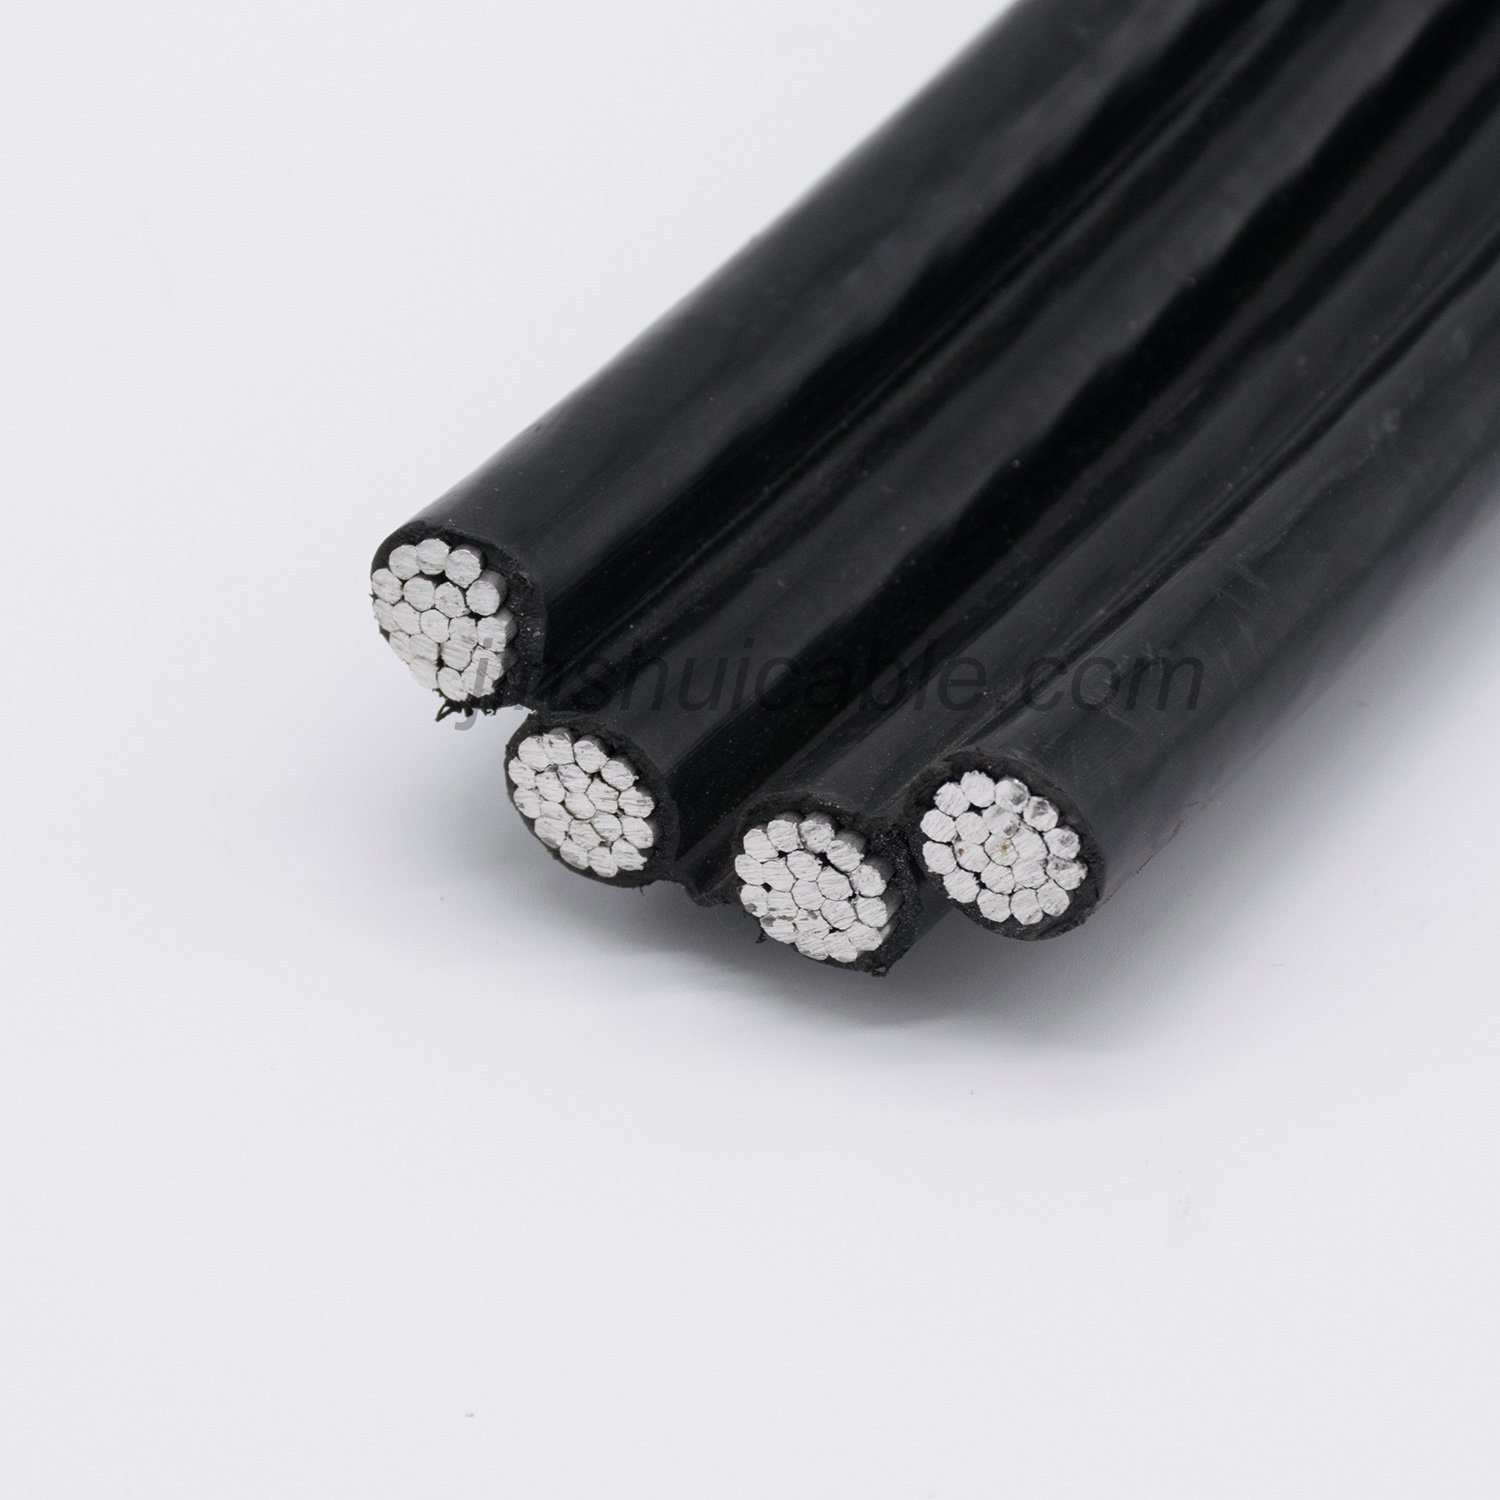 Professional Supplier of 3X35mm Aerial Bundled Cable (ABC) Overhead Electric Transmission Cable